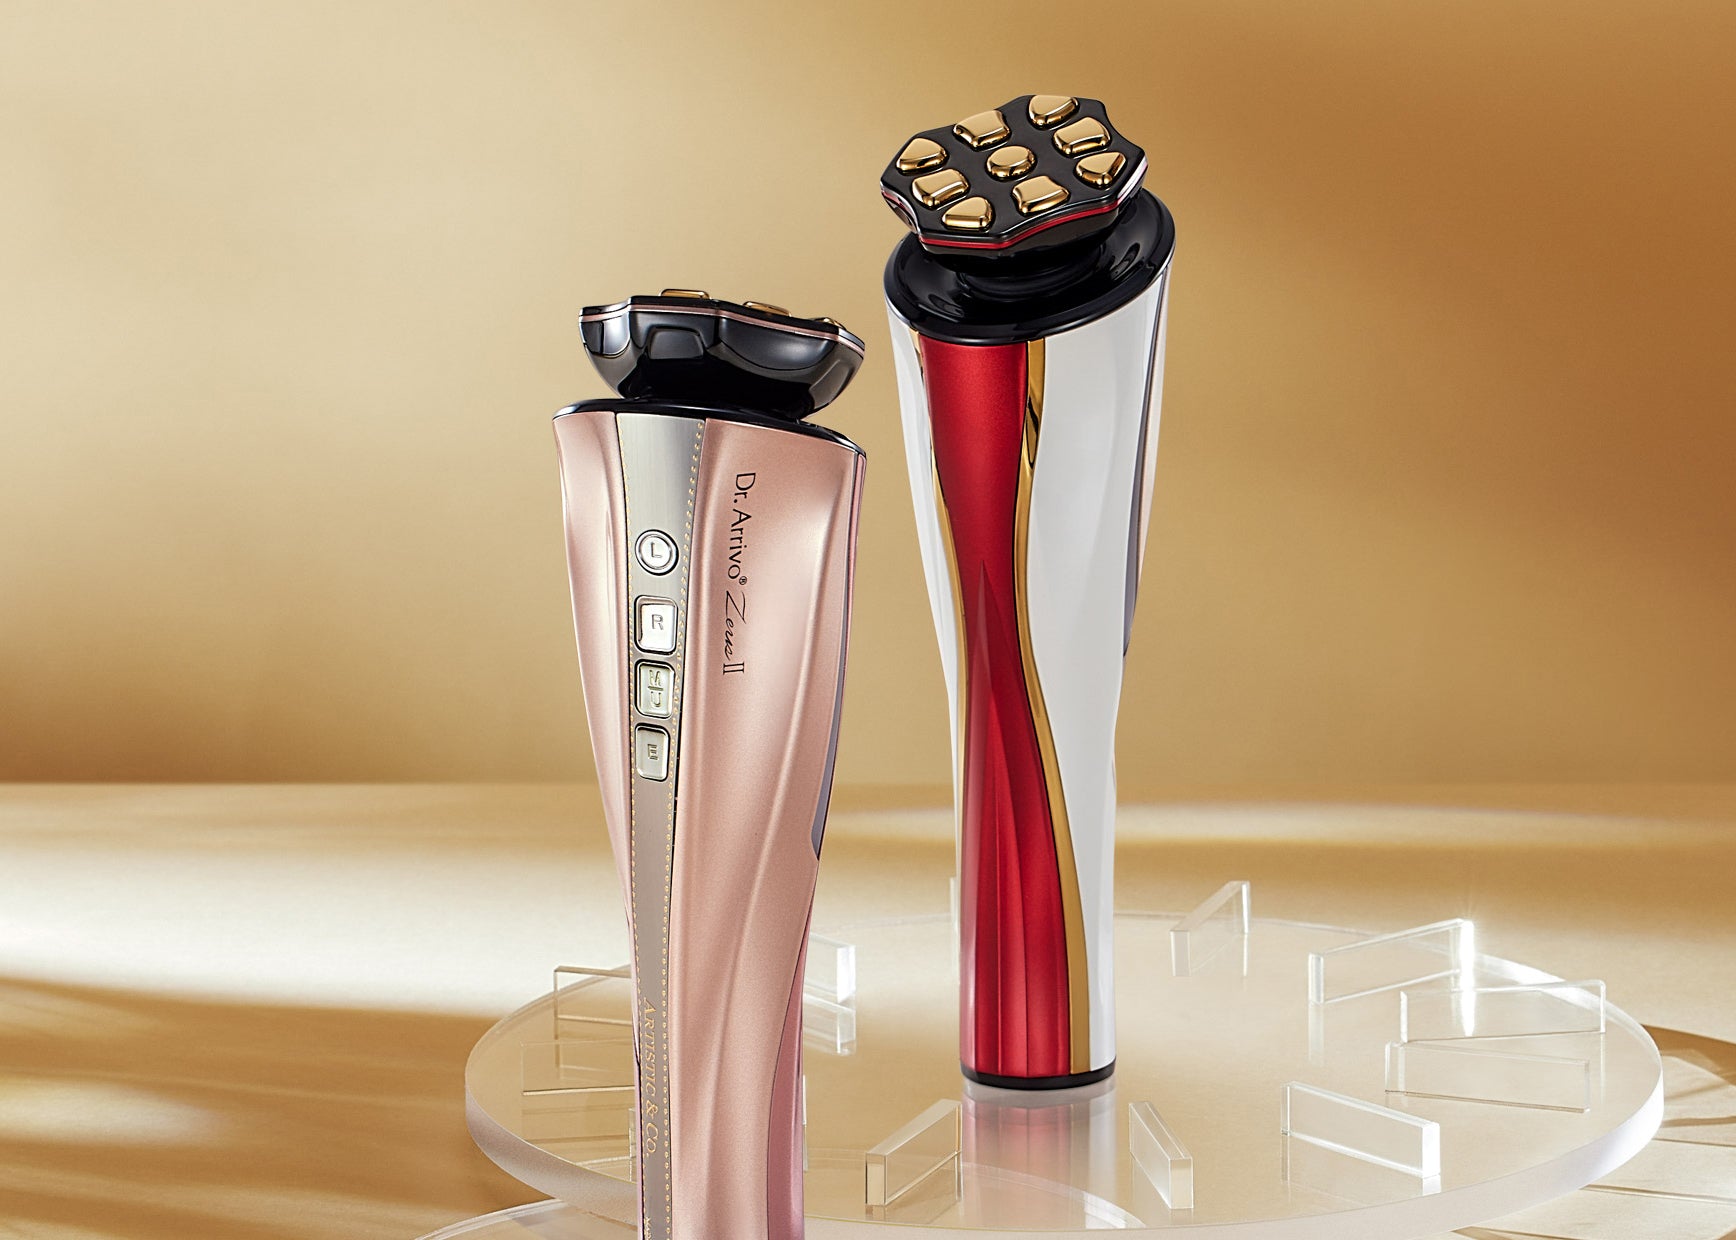 The Dr. Arrivo Zeus II Beauty Device: Med-Spa Technology for At